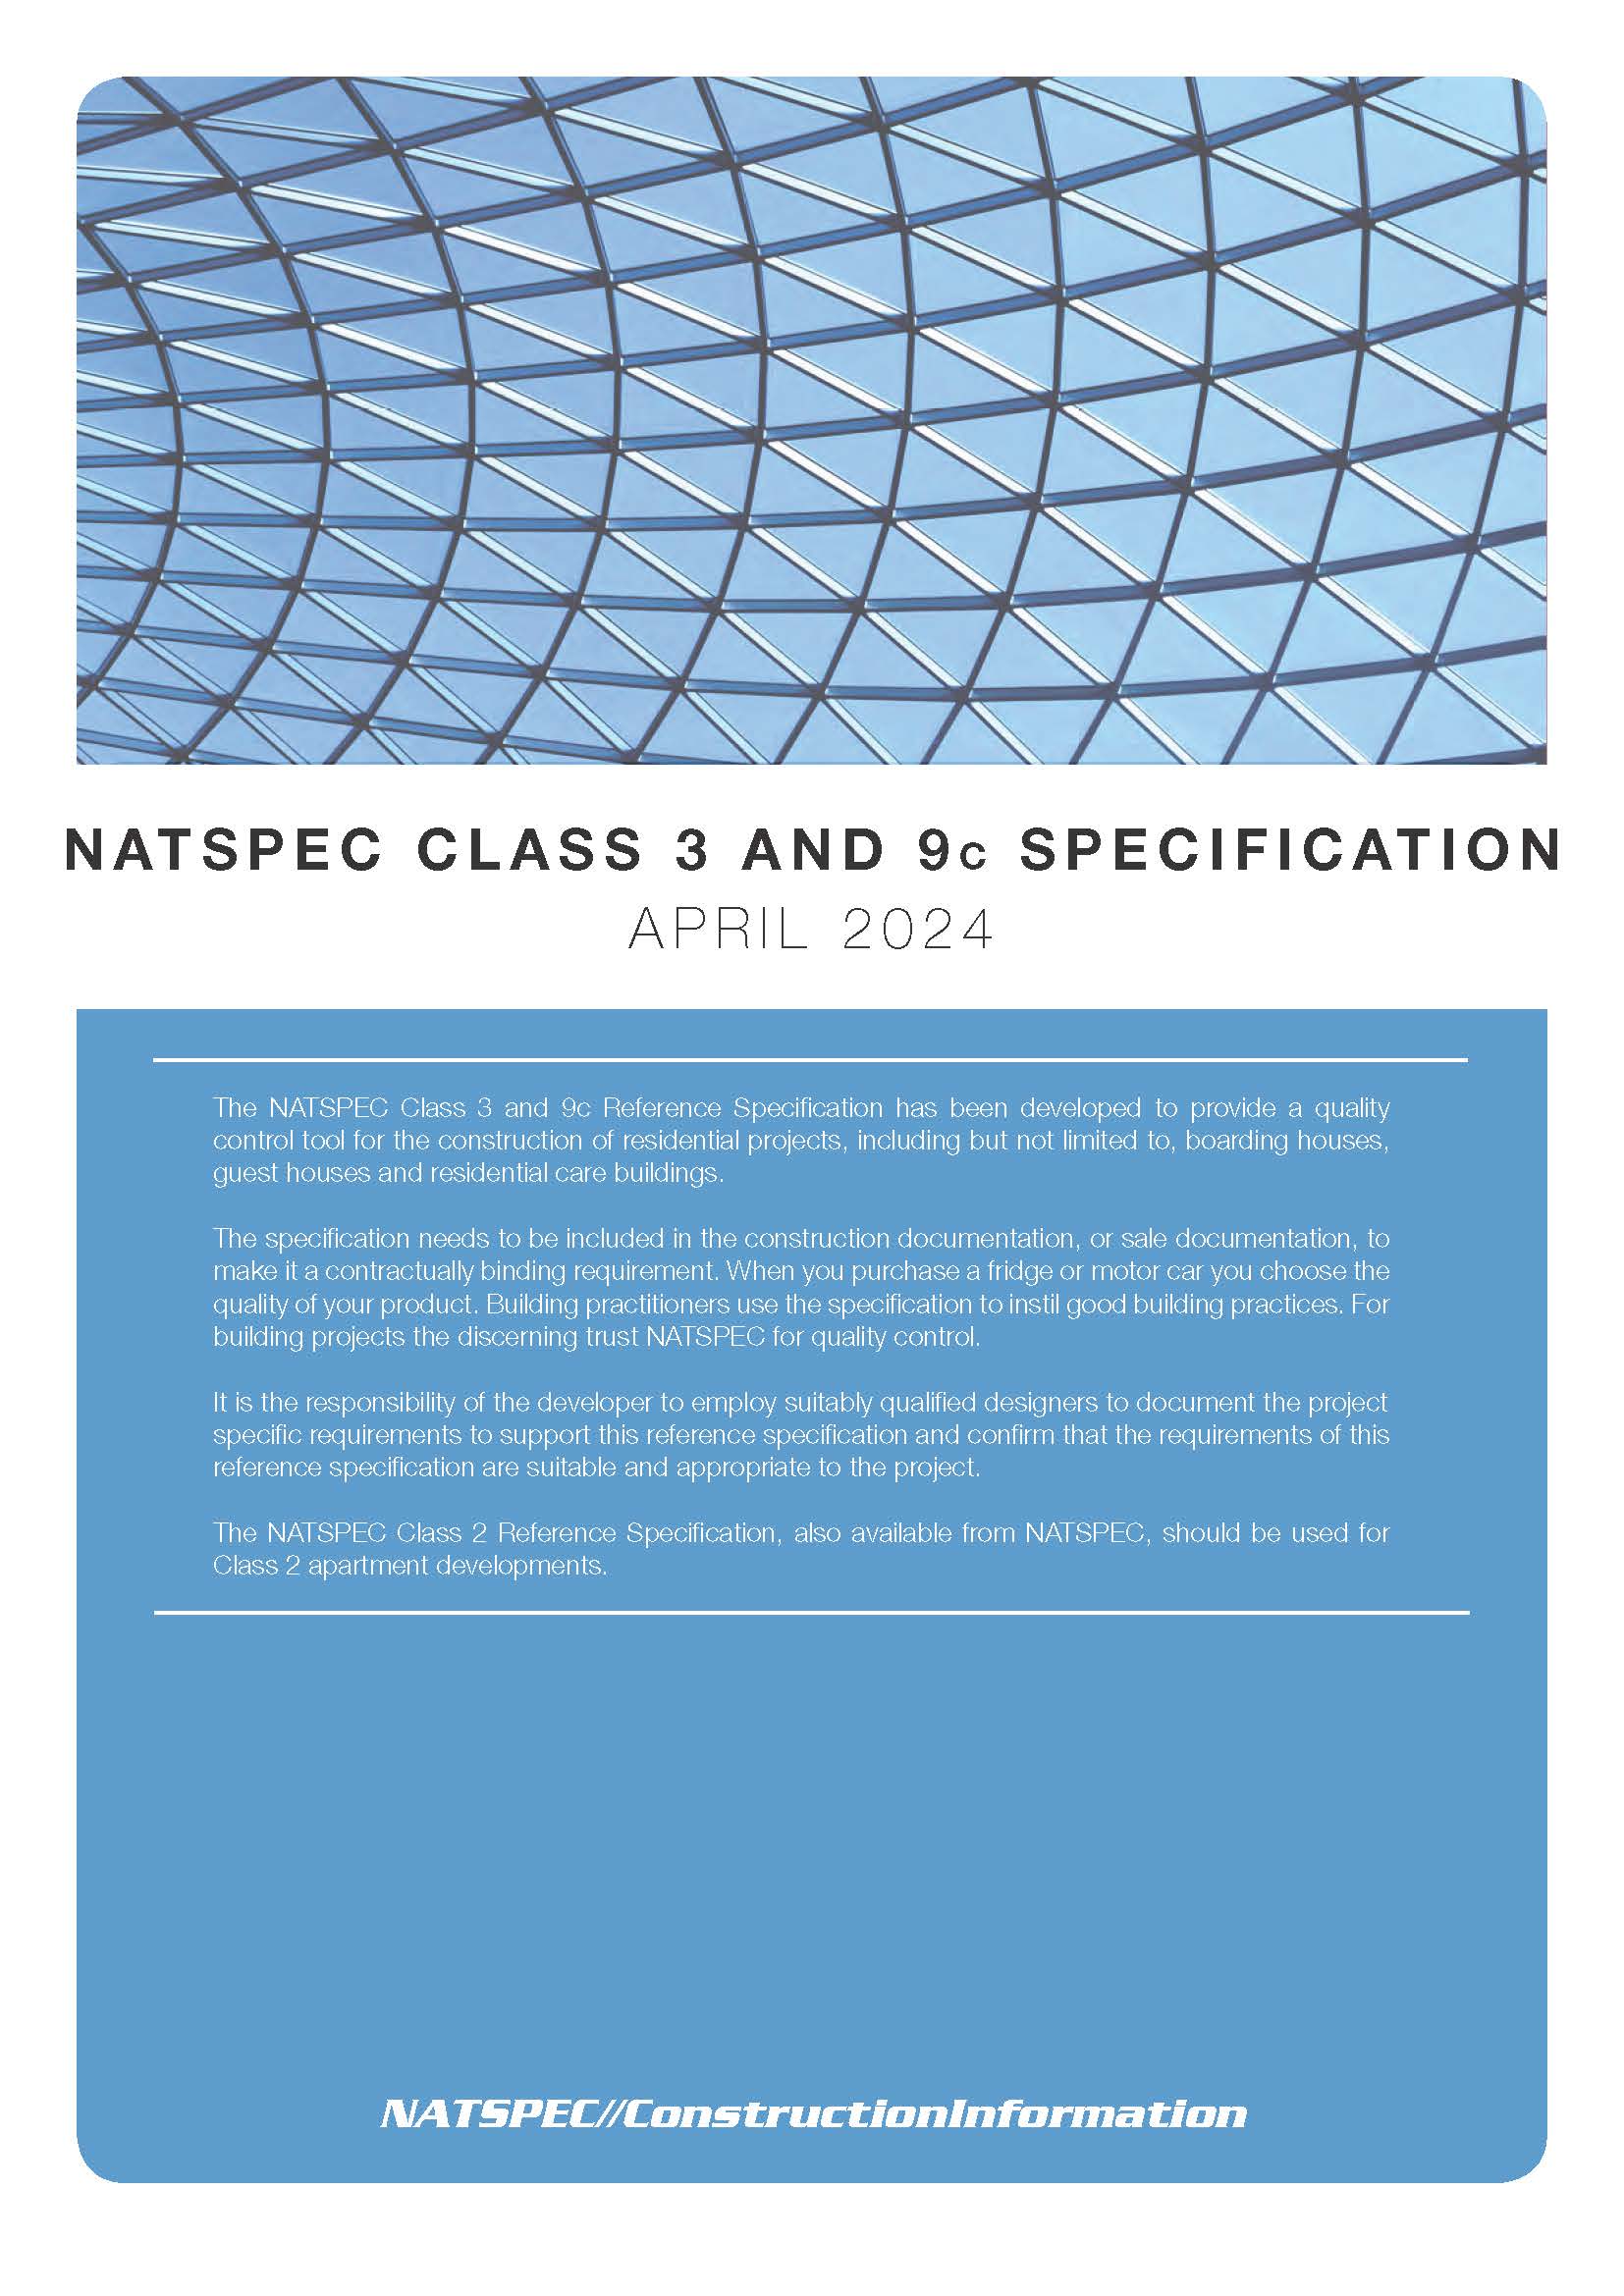 NATSPEC Class 3 and 9c Specification